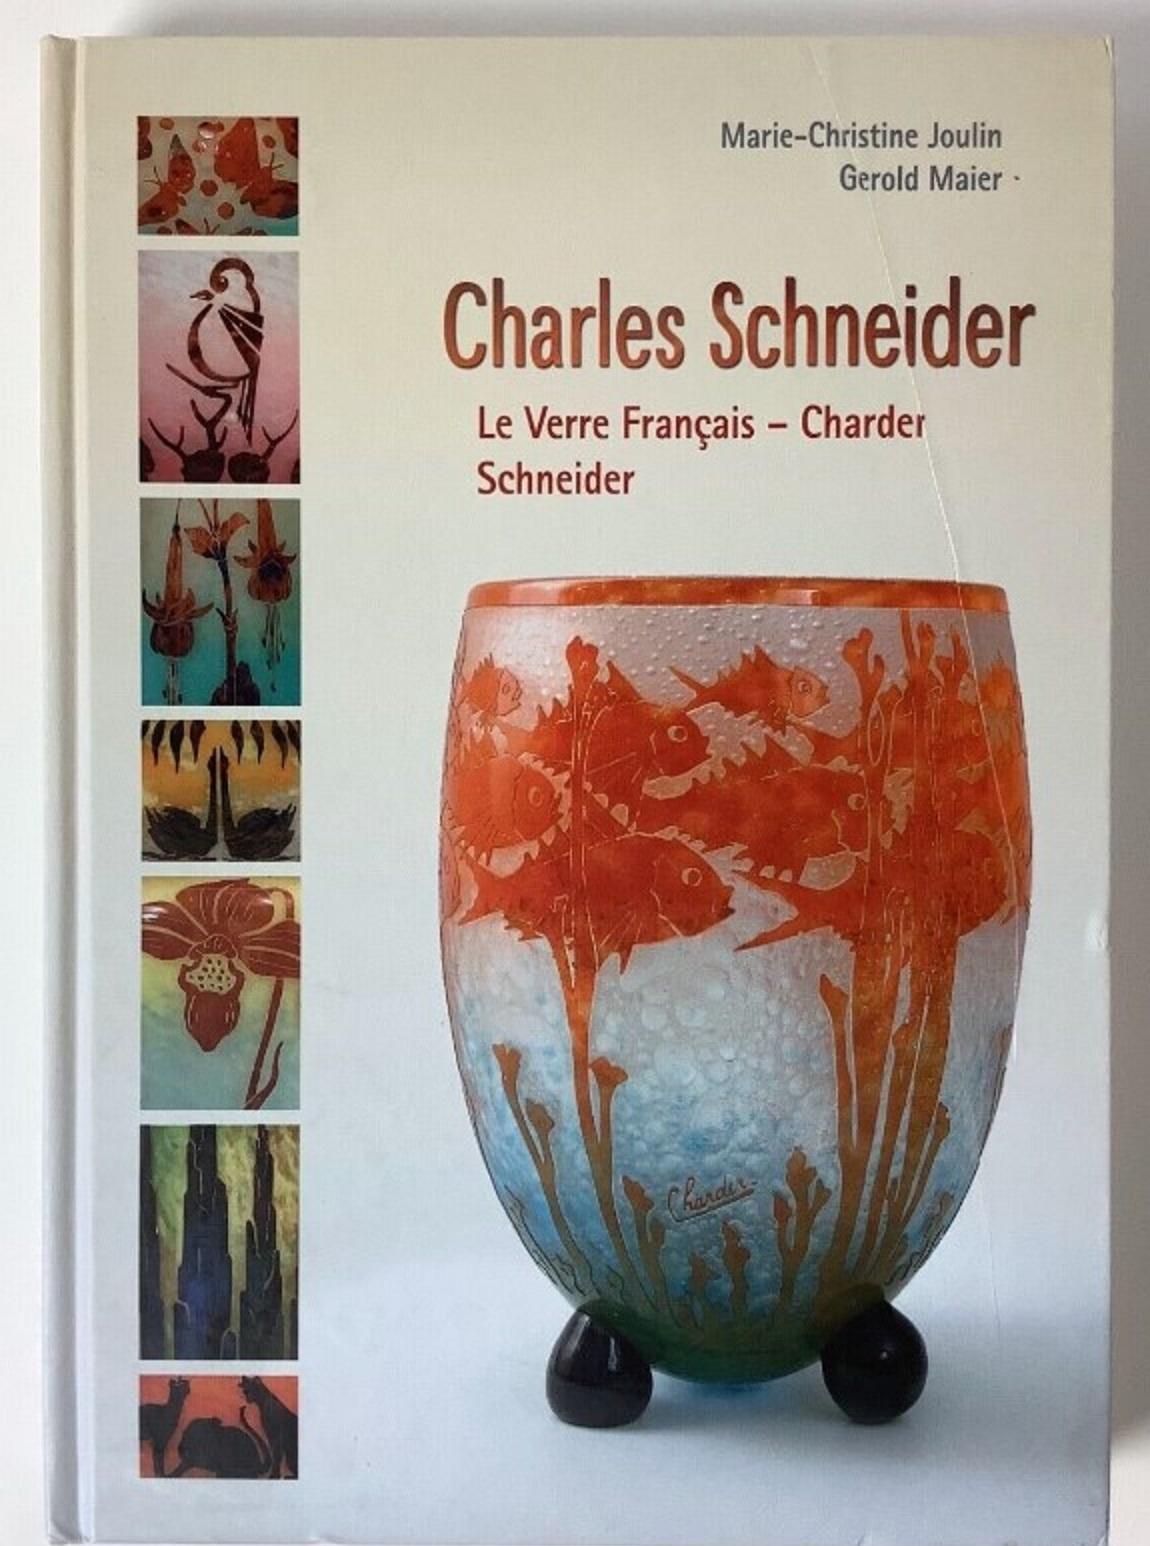 Vase Le Verre Francais 
Page: 232 book Schneider Maître Verrier
Author: Olivier Ador
acid worked
Le Verre cameo glass was a separate line of art glass designed by Charles Schneider. Its production was made at the same time as the Schneider designed